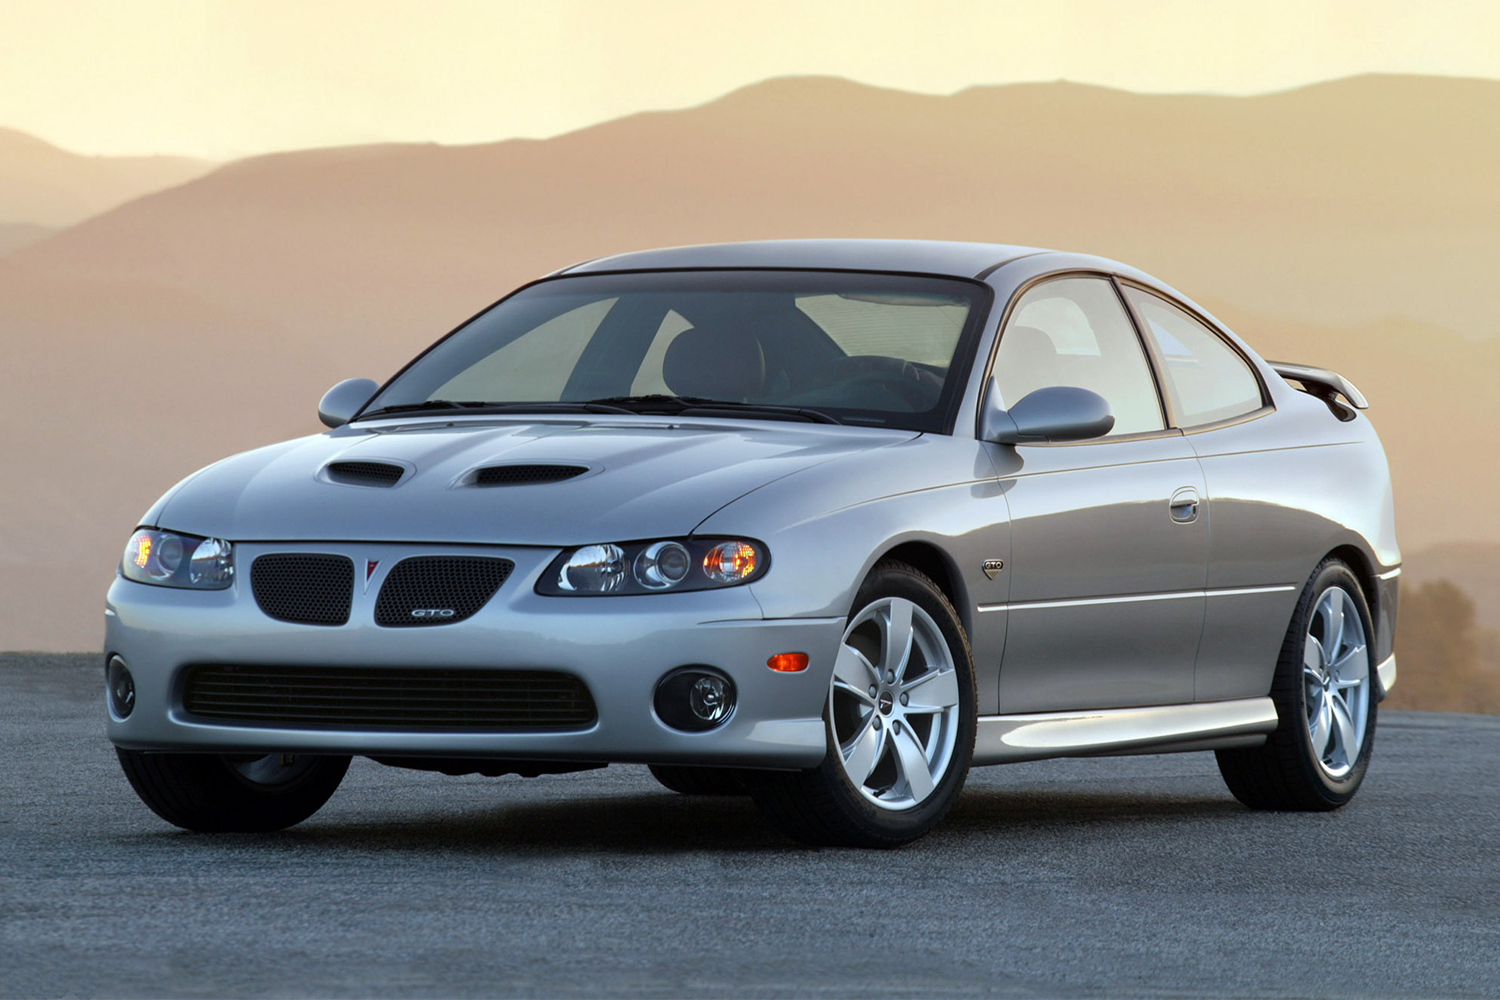 The 2005 Pontiac GTO, the fifth generation of the iconic muscle car, which is overdue for a rebirth